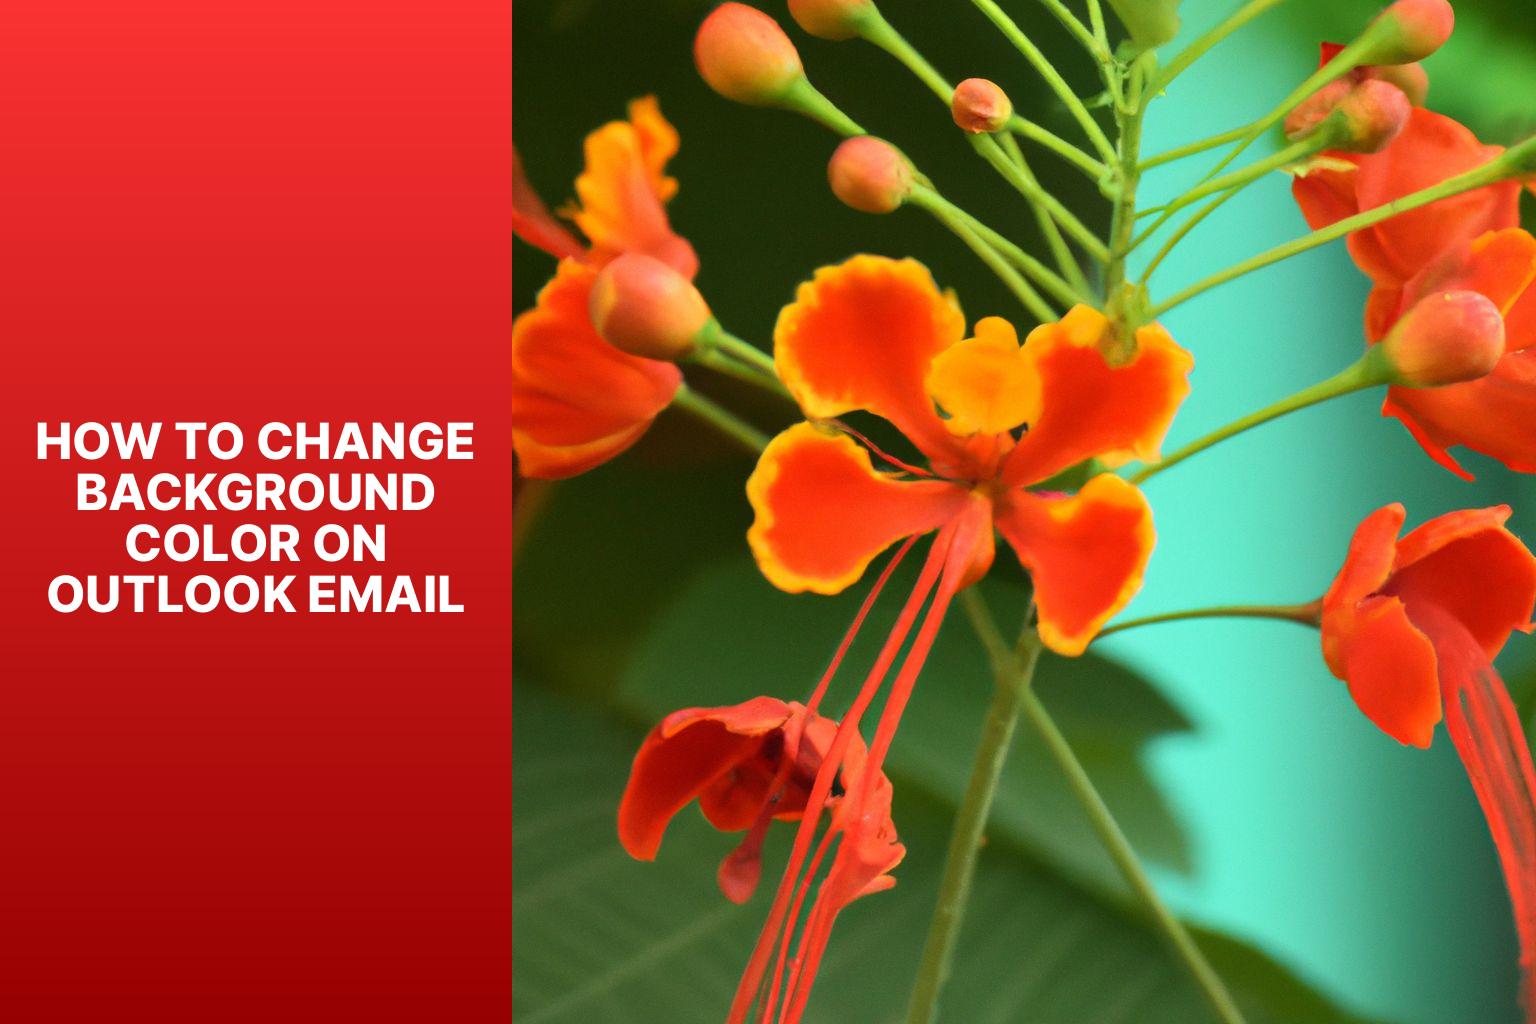 Change Background Color on Outlook Email how to change background color on outlook email6csc